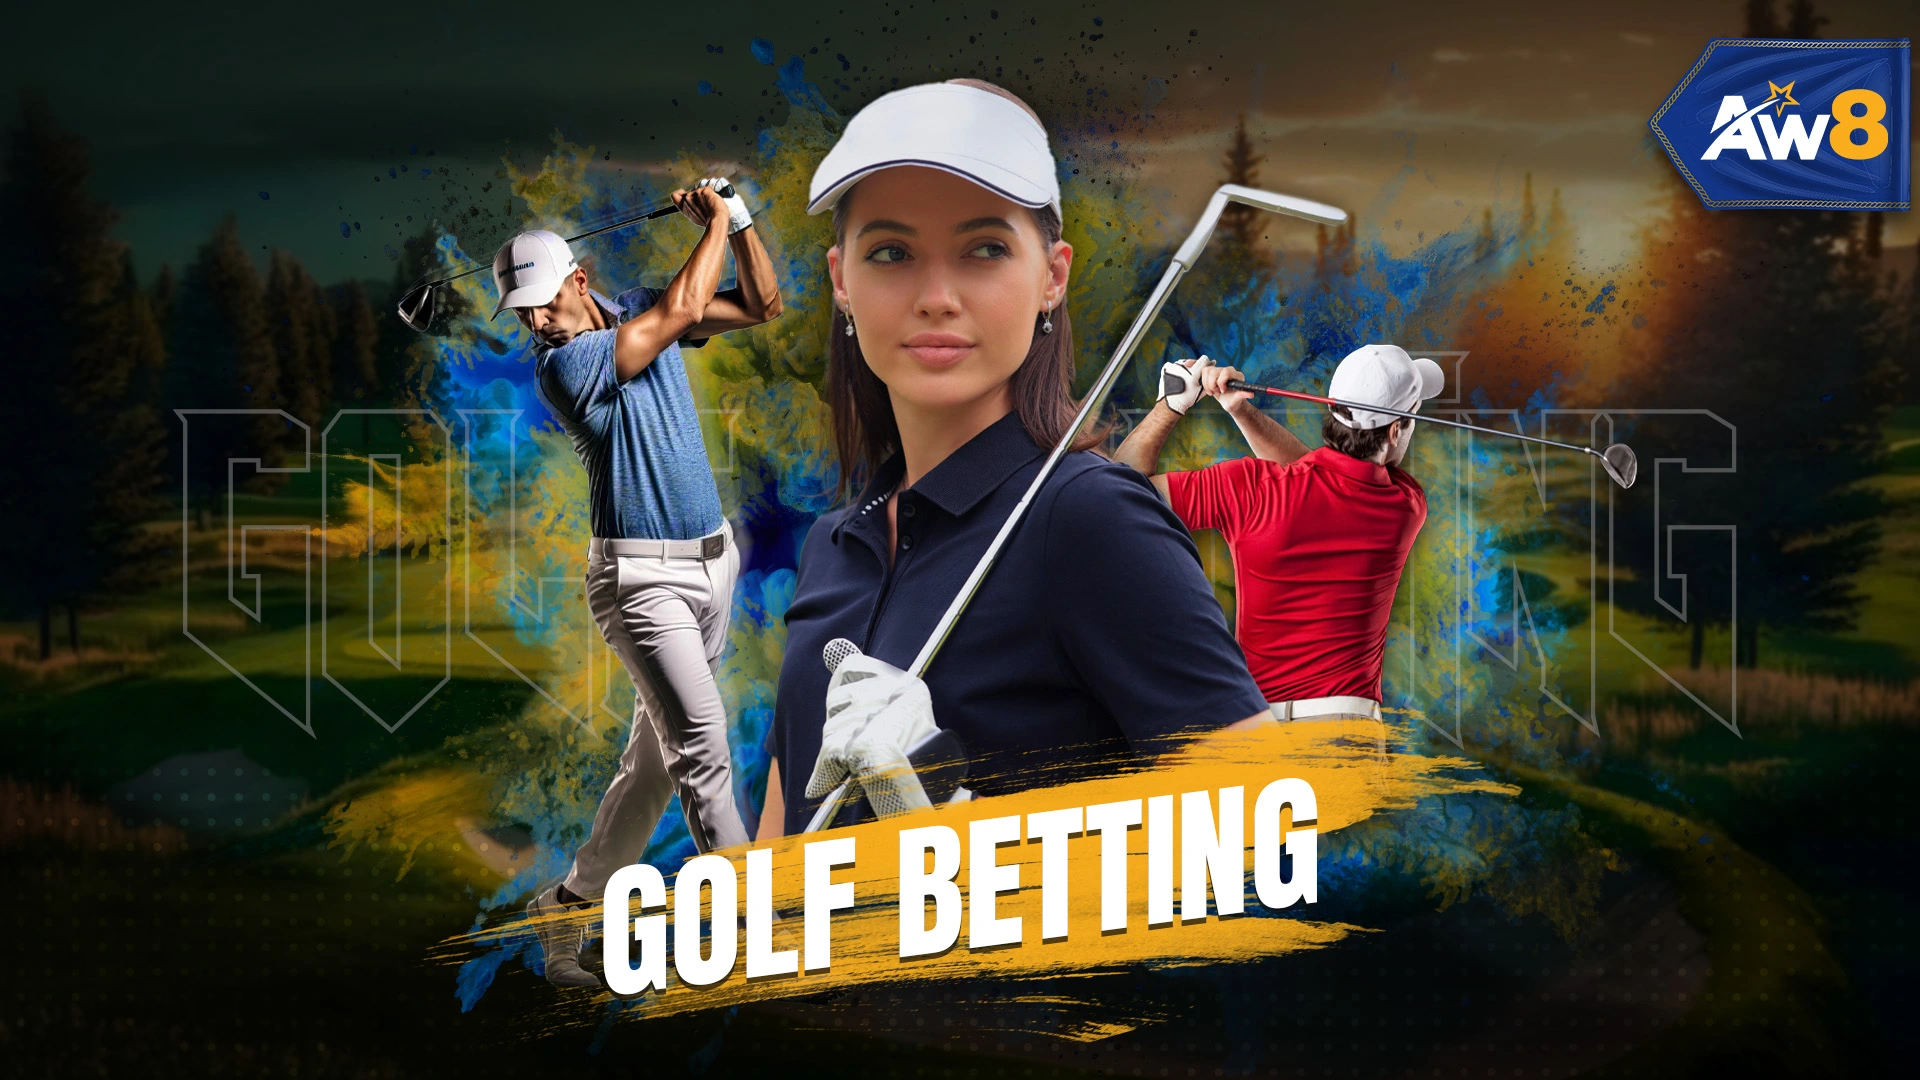 Bet on Golf in Malaysia with AW8